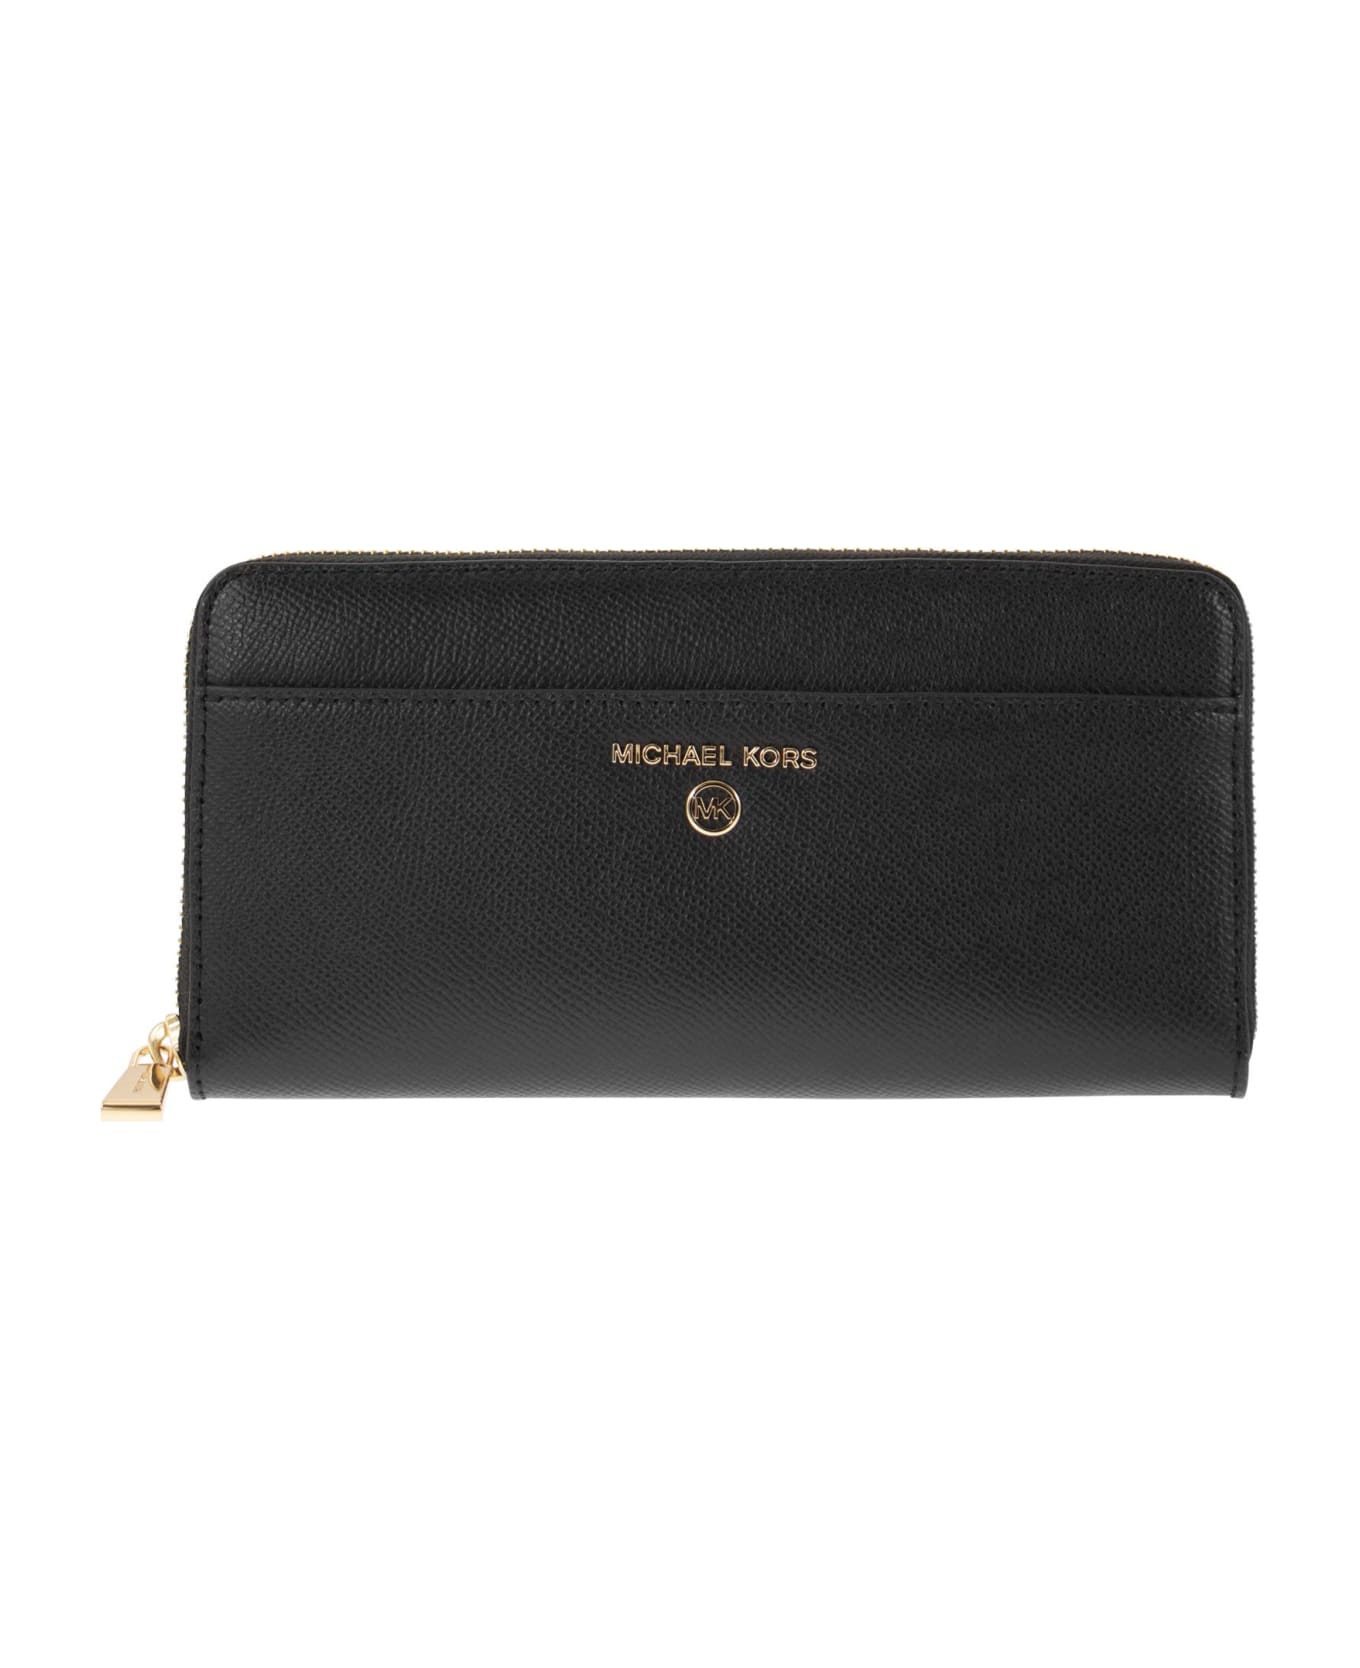 Michael Kors Continental Wallet With Logo - Black